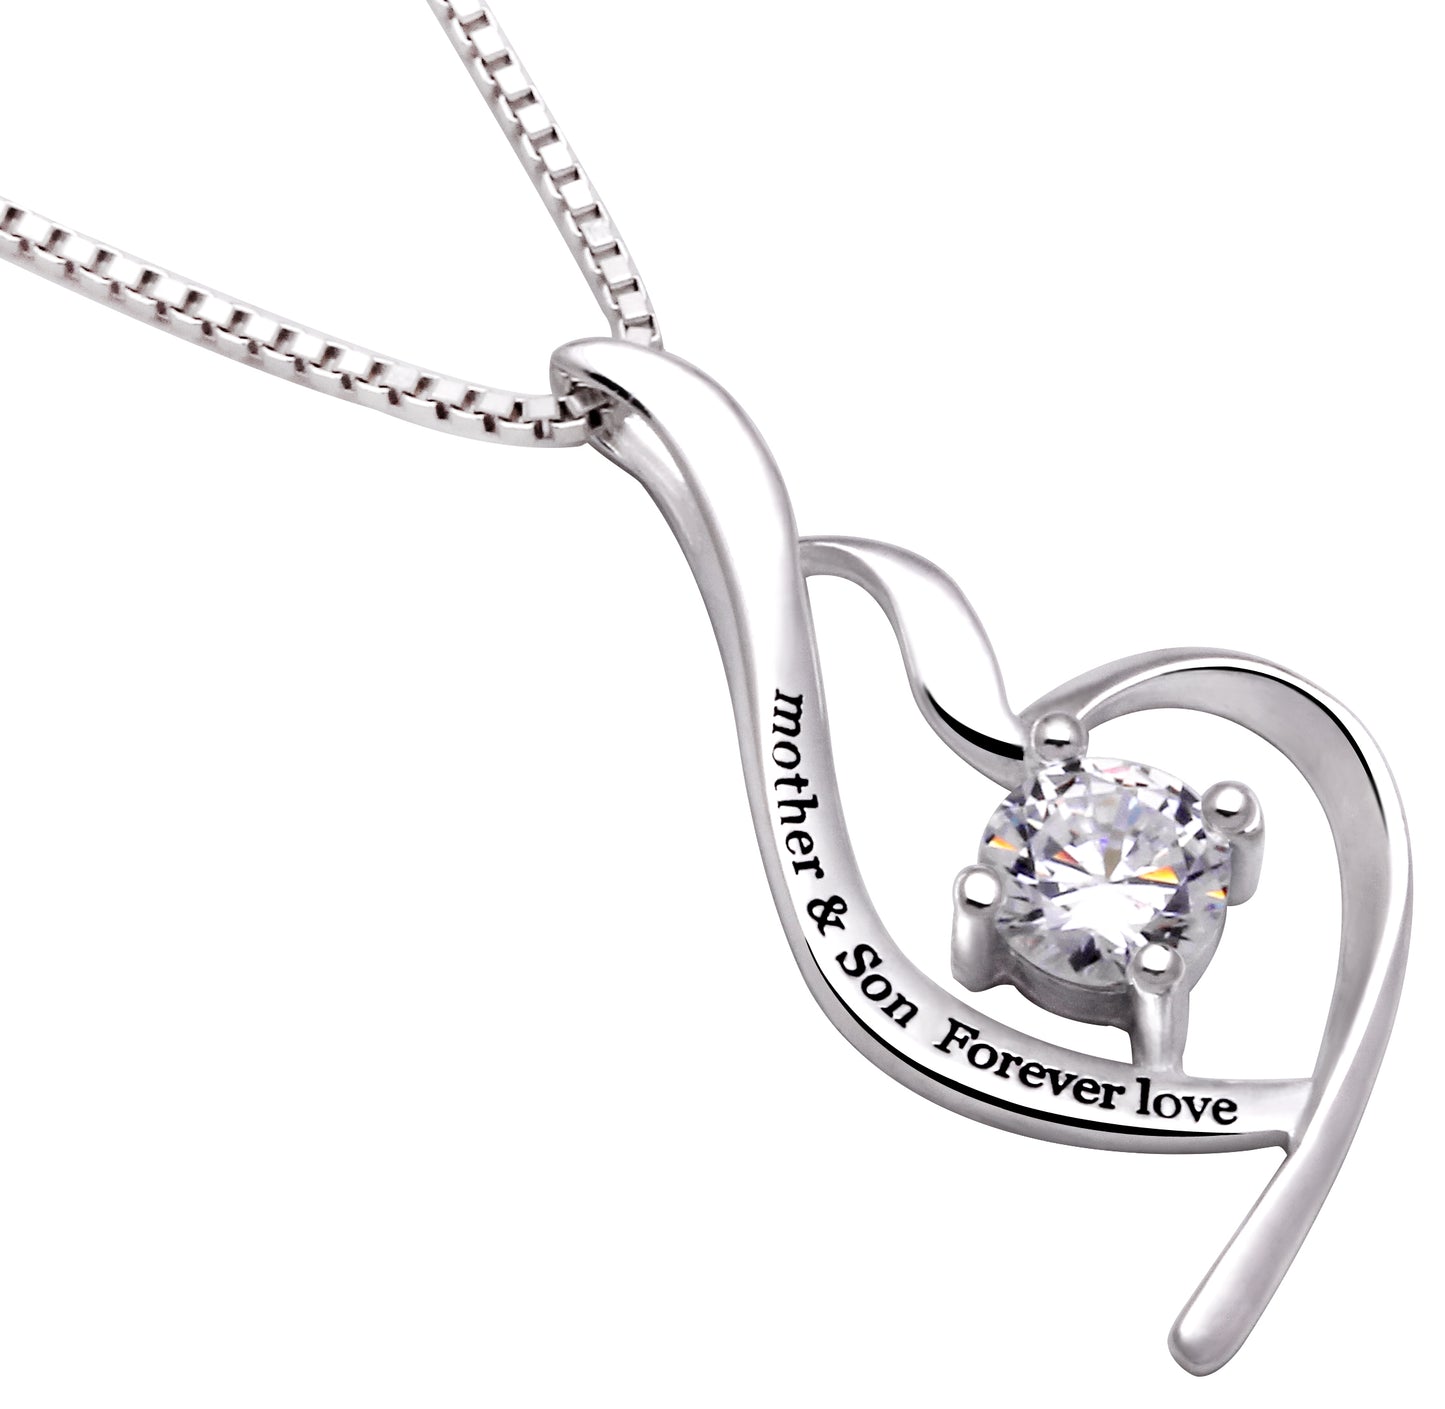 ALOV Jewelry Sterling Silver "mother & son forever love" Cubic Zirconia Pendant Necklace